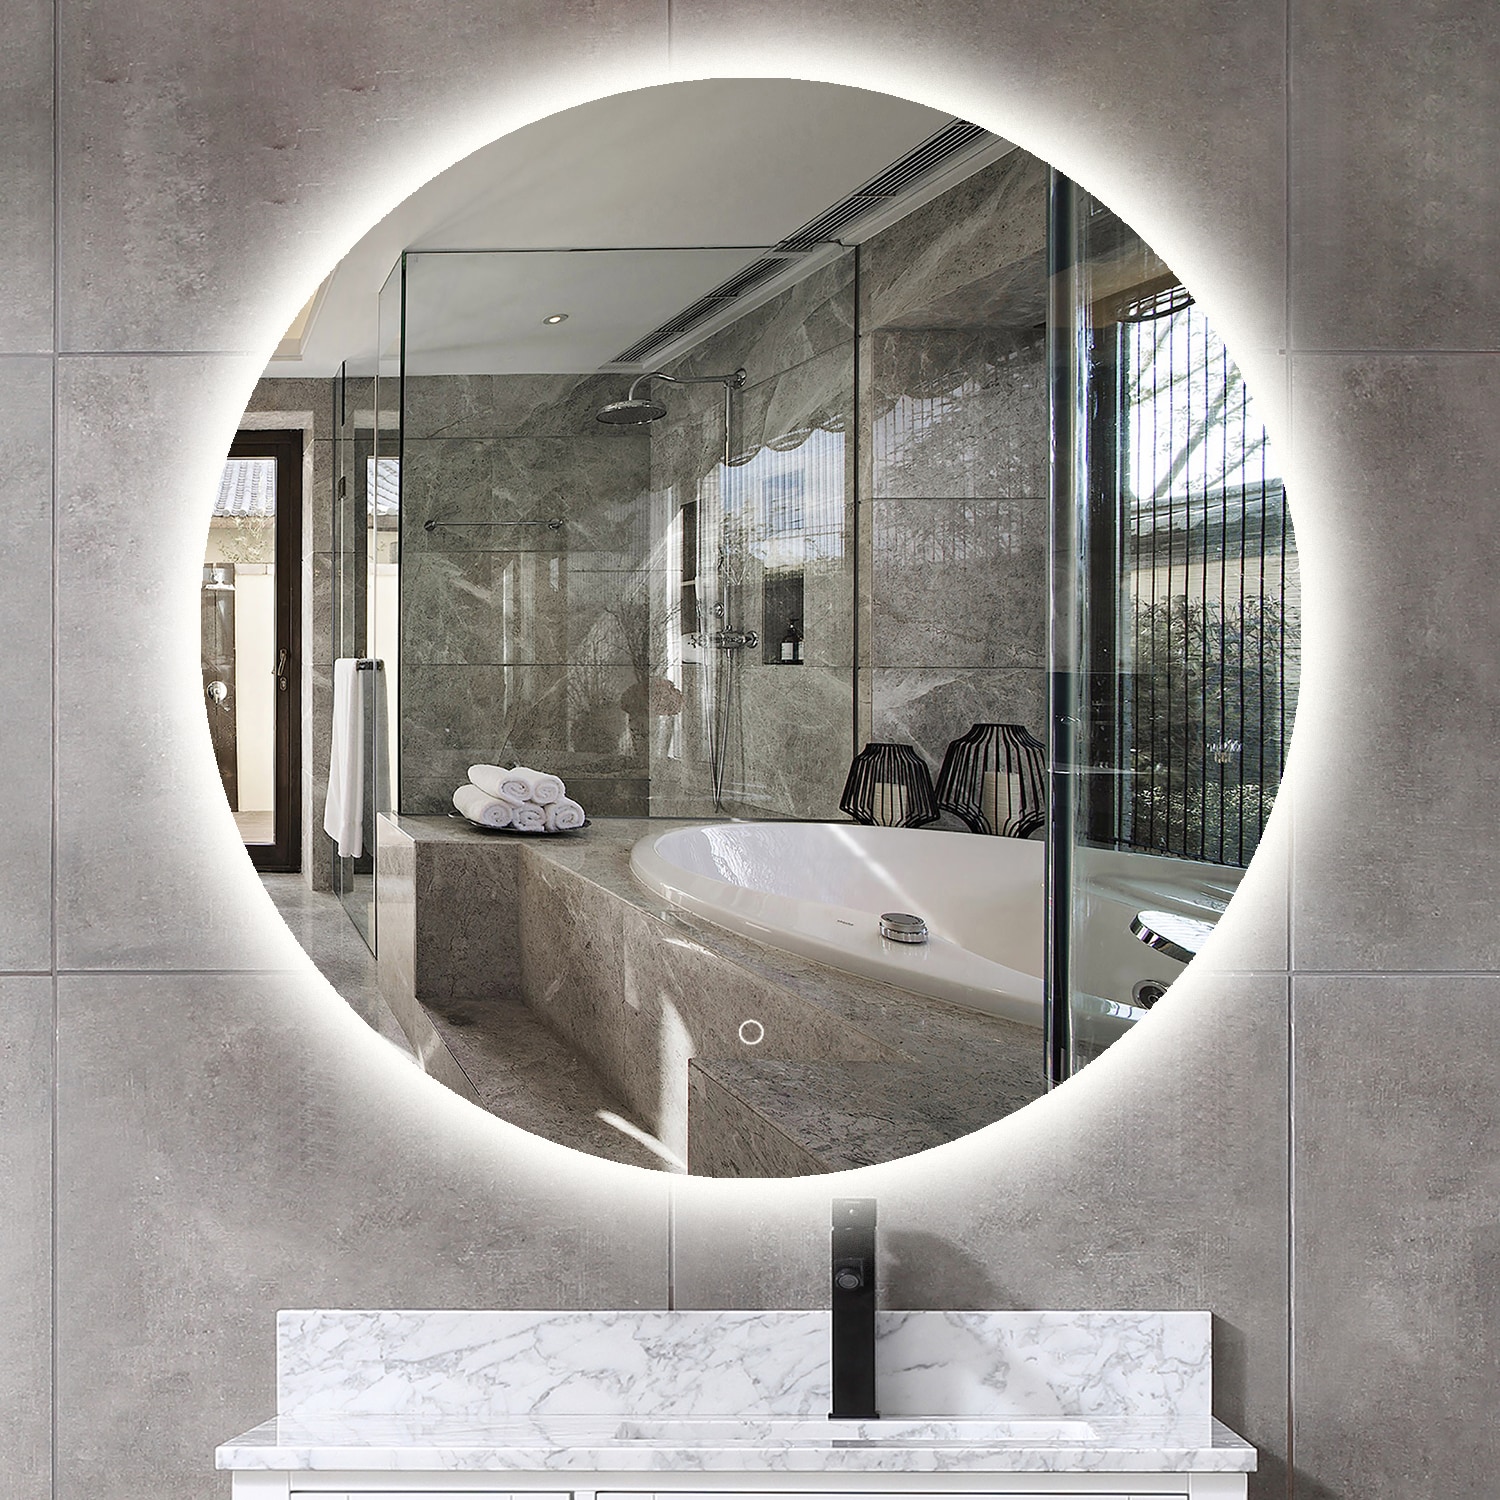 HOMLUX 32 in. W x 32 in. H Round Frameless LED Light with Anti-Fog Wall Mounted Bathroom Vanity Mirror, Silver